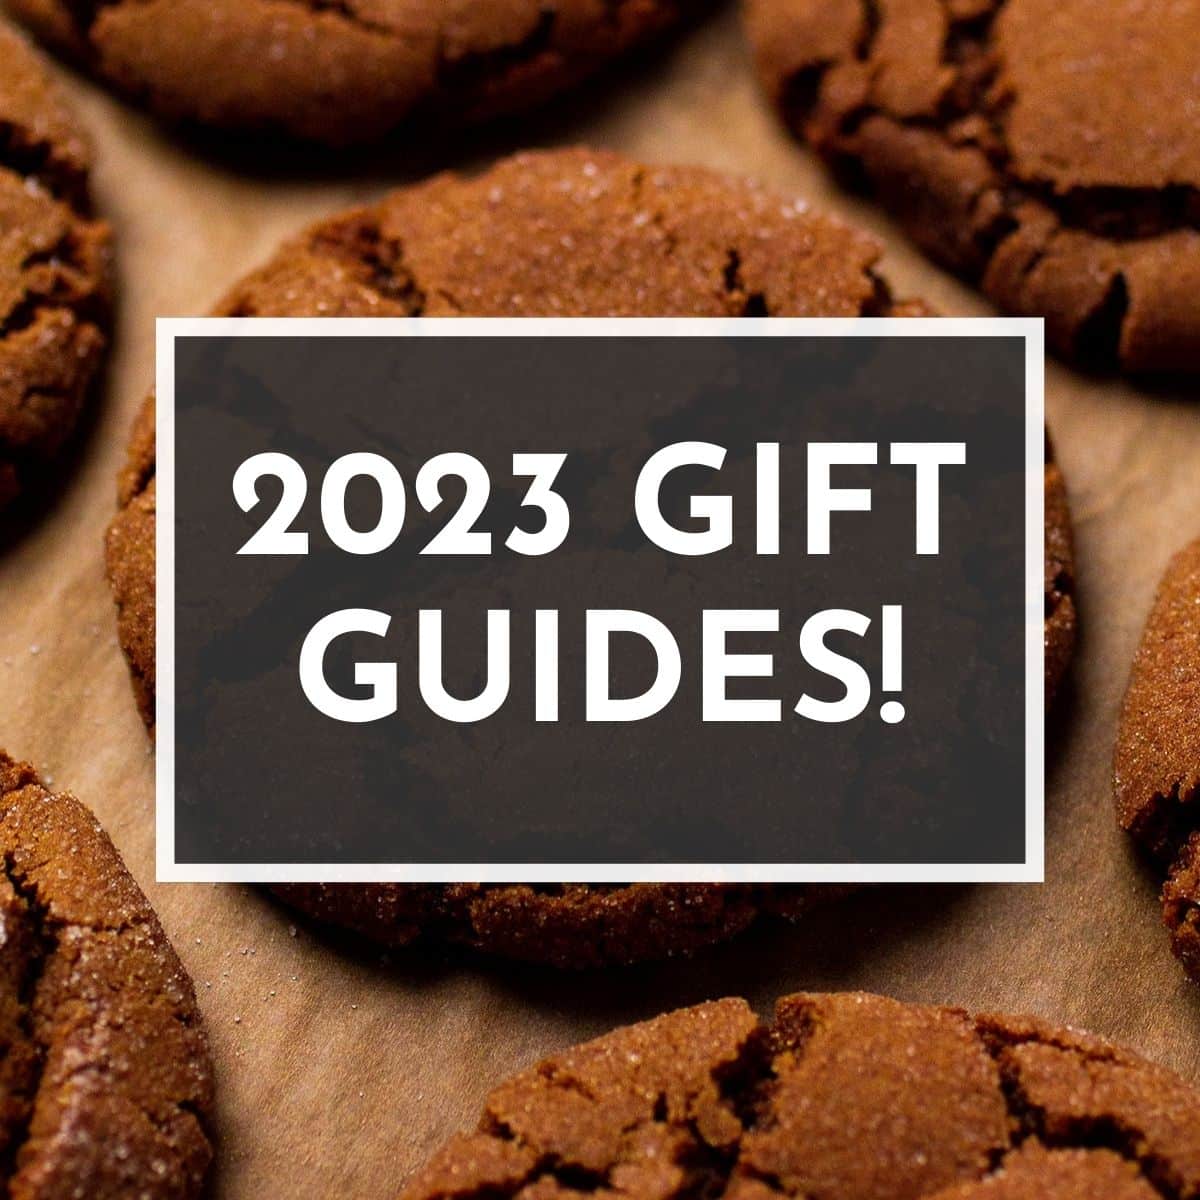 2023 Gift Guides.